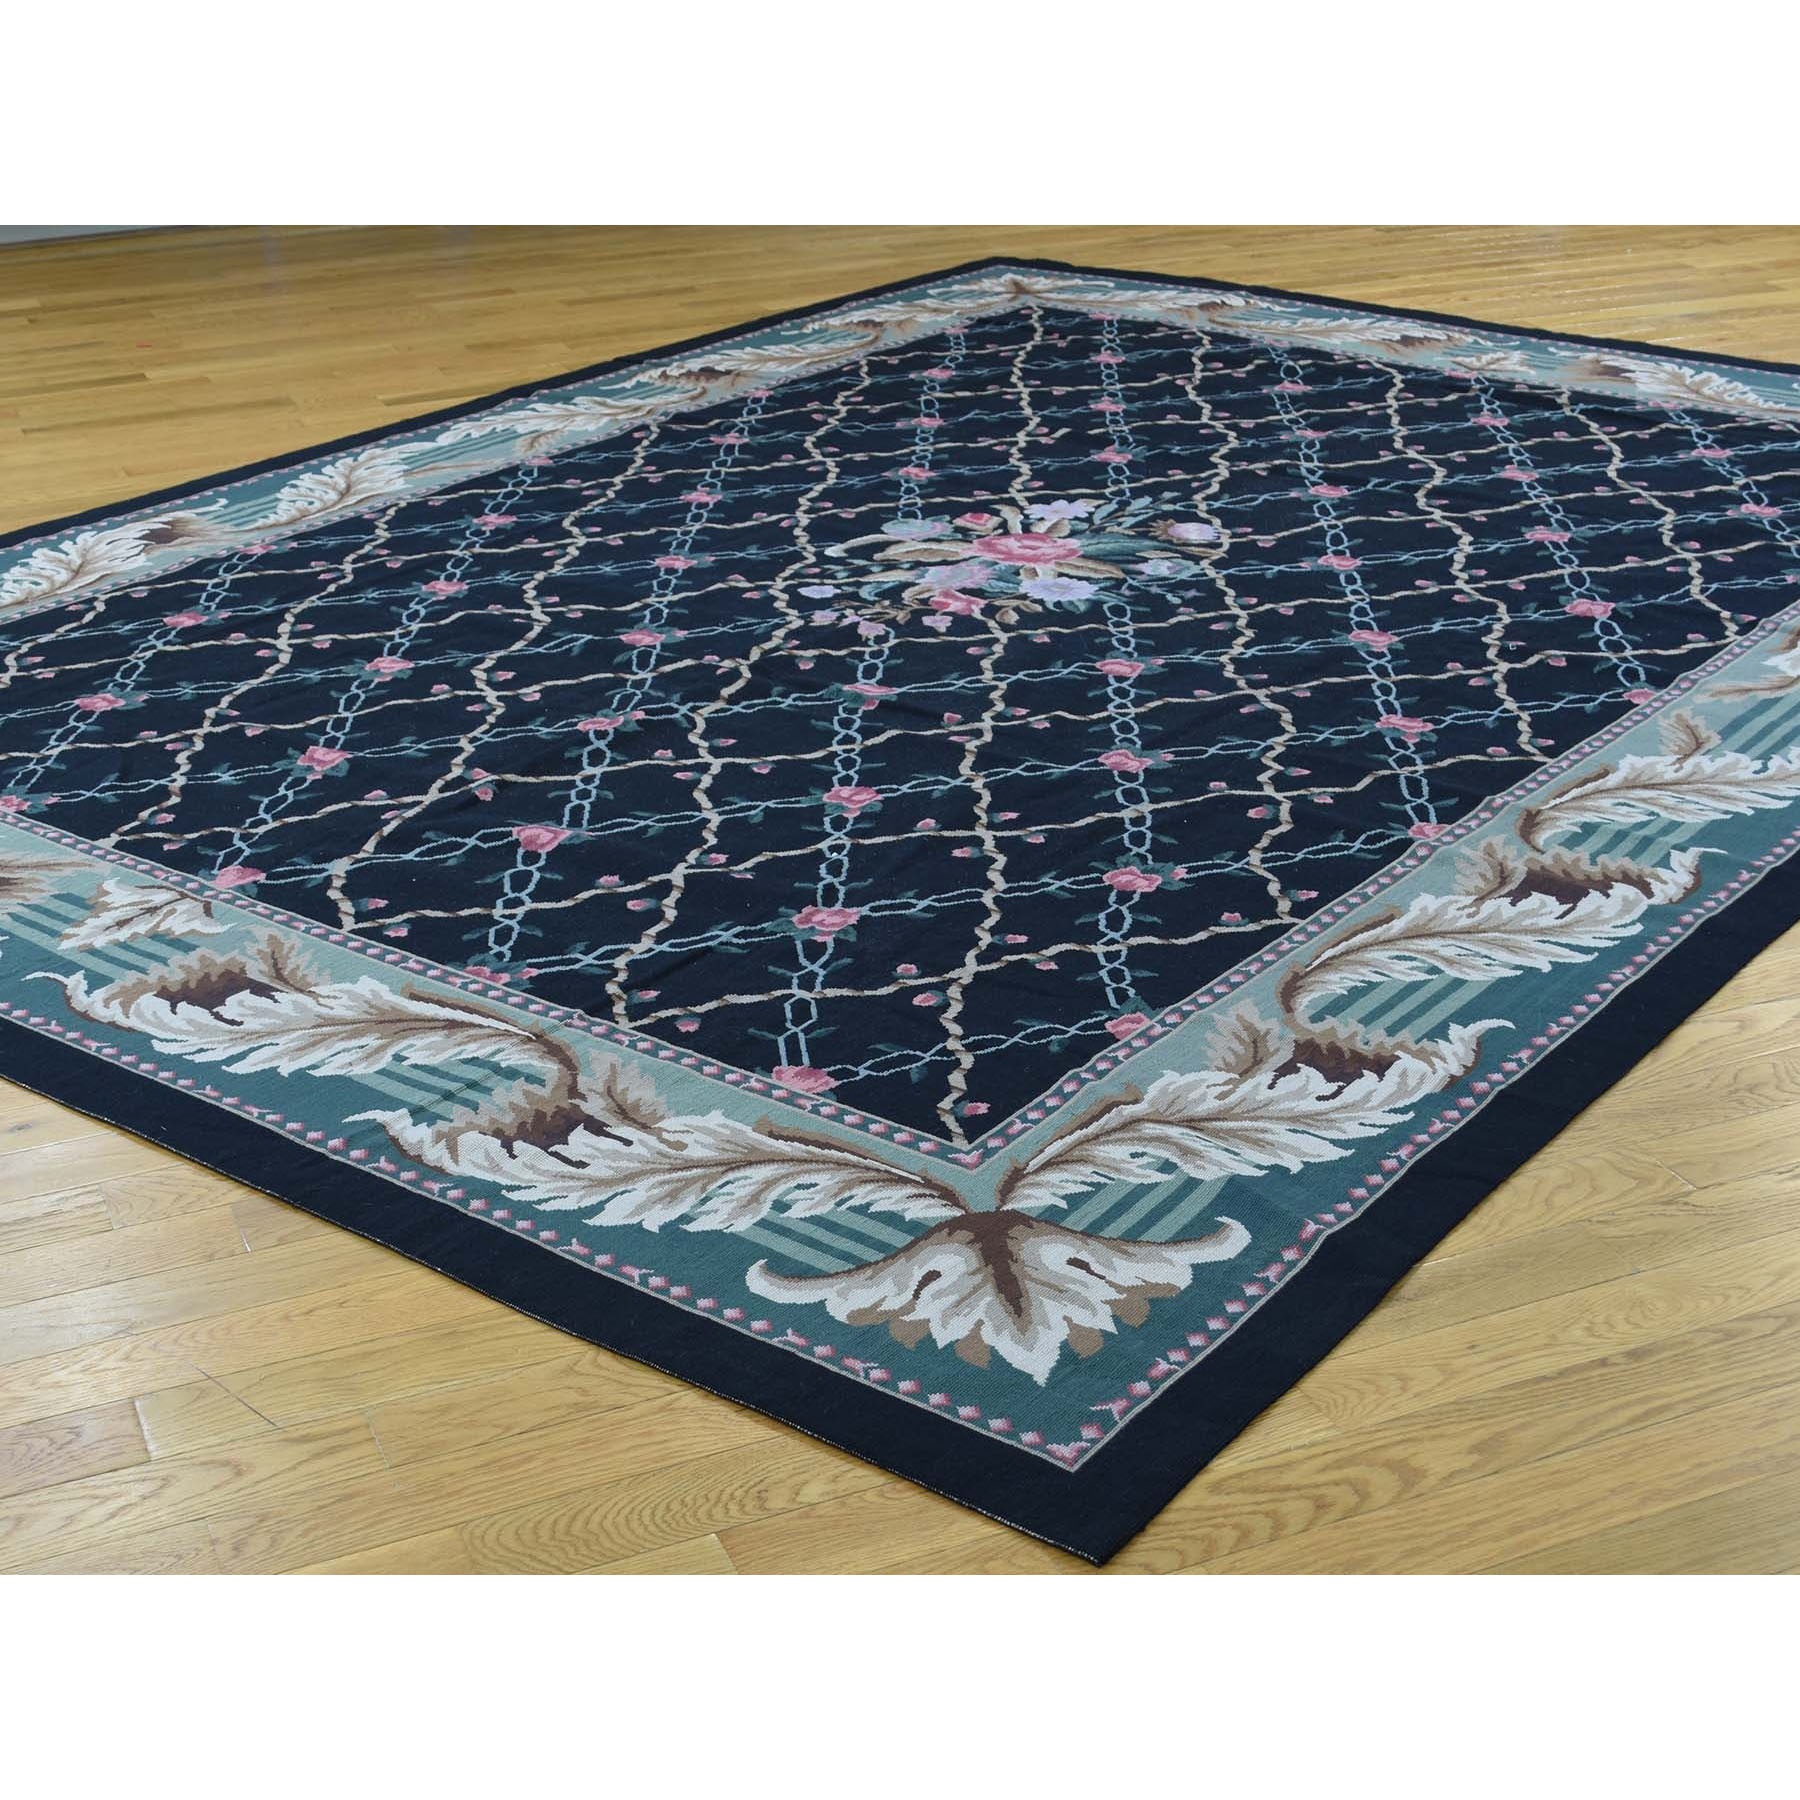 9-x11-10  On Clearance Needlepoint Hand-Stitched Botanical Design Pure Wool Rug 